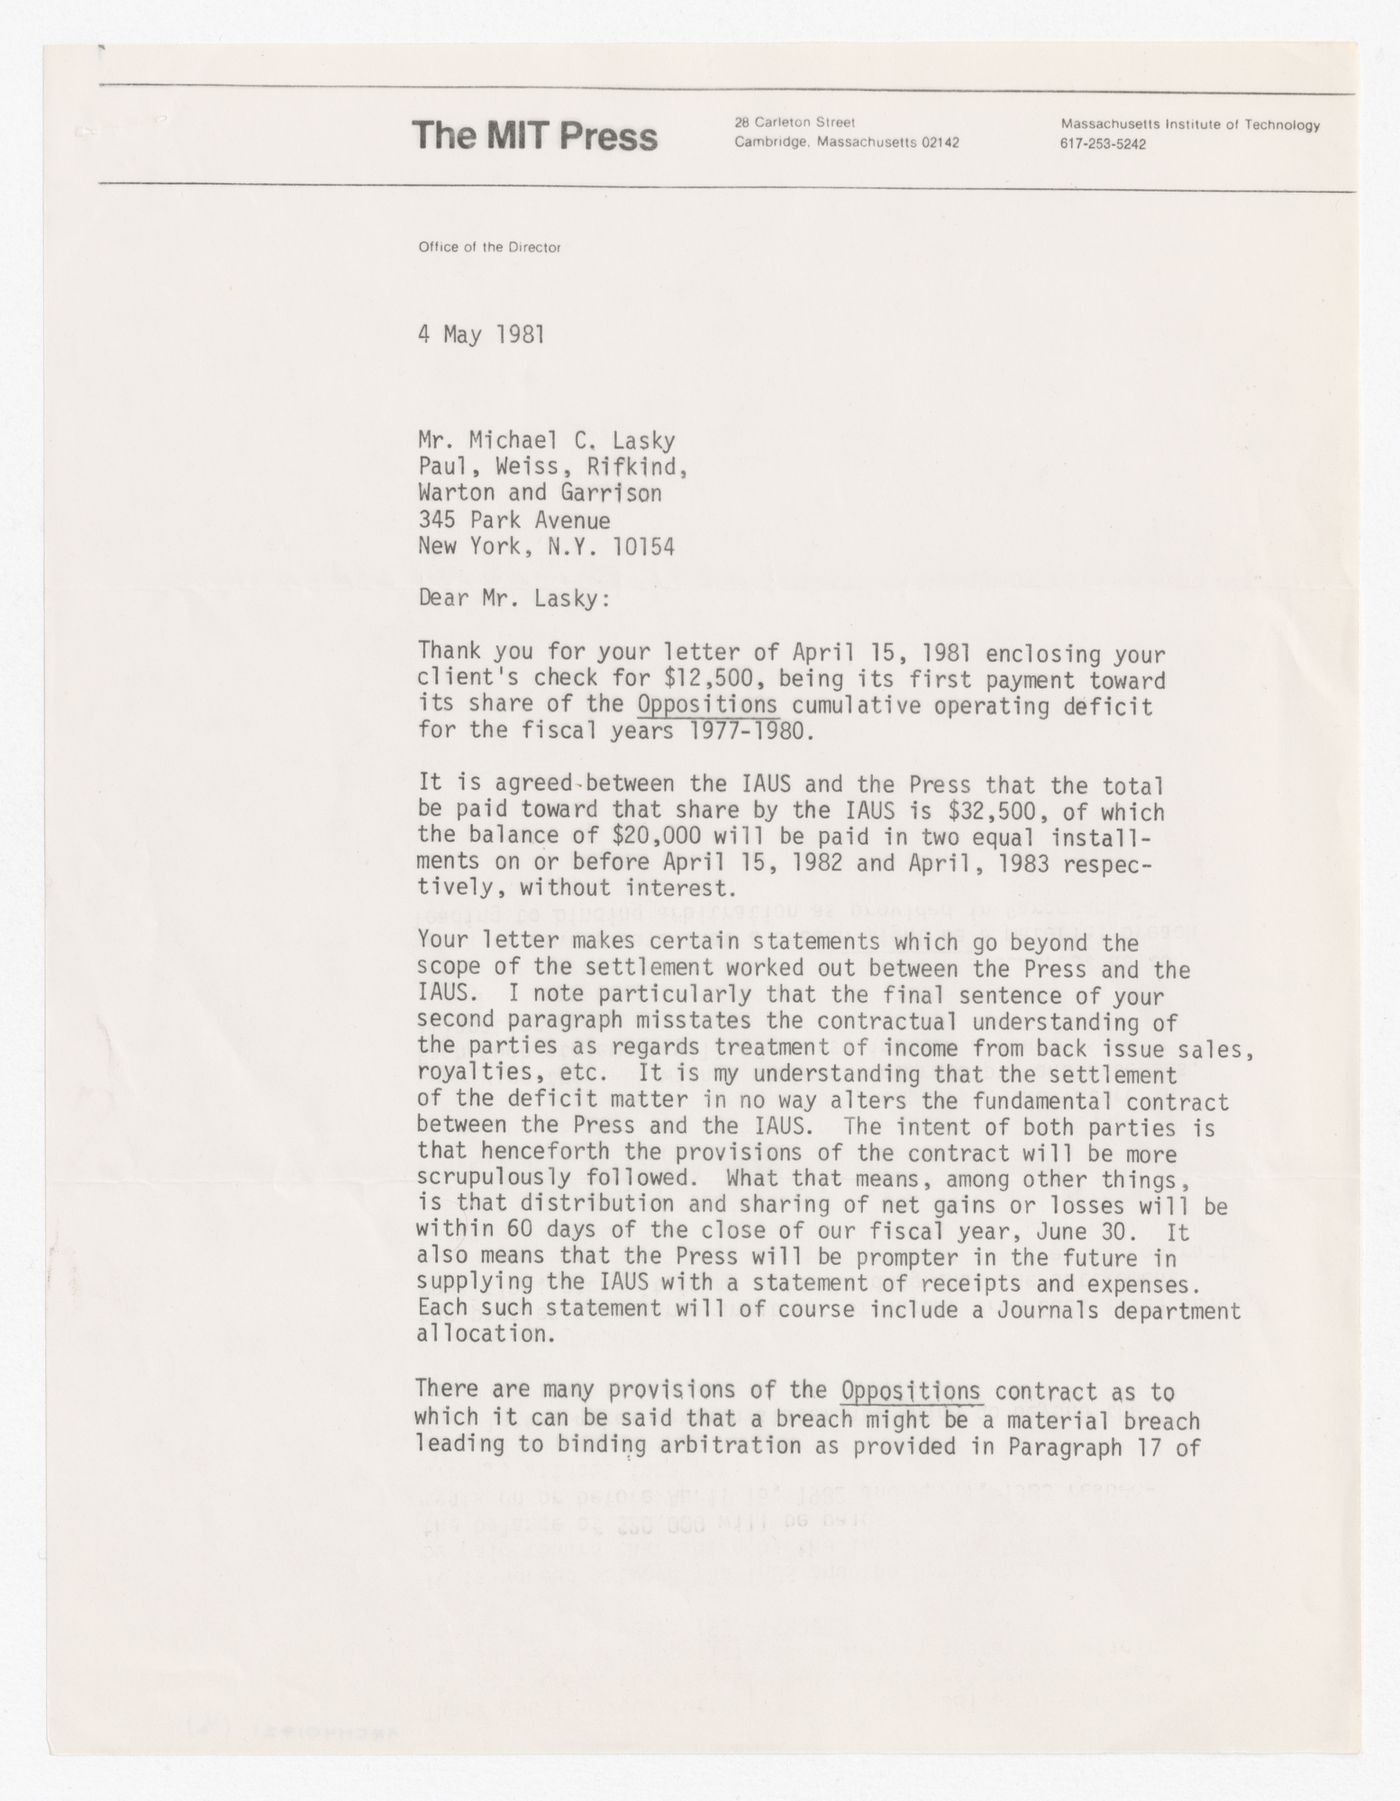 Letter from Frank Urbanowski to Michael C. Lasky about repayment of Oppositions Journal cumulative operating deficit for 1977-1980